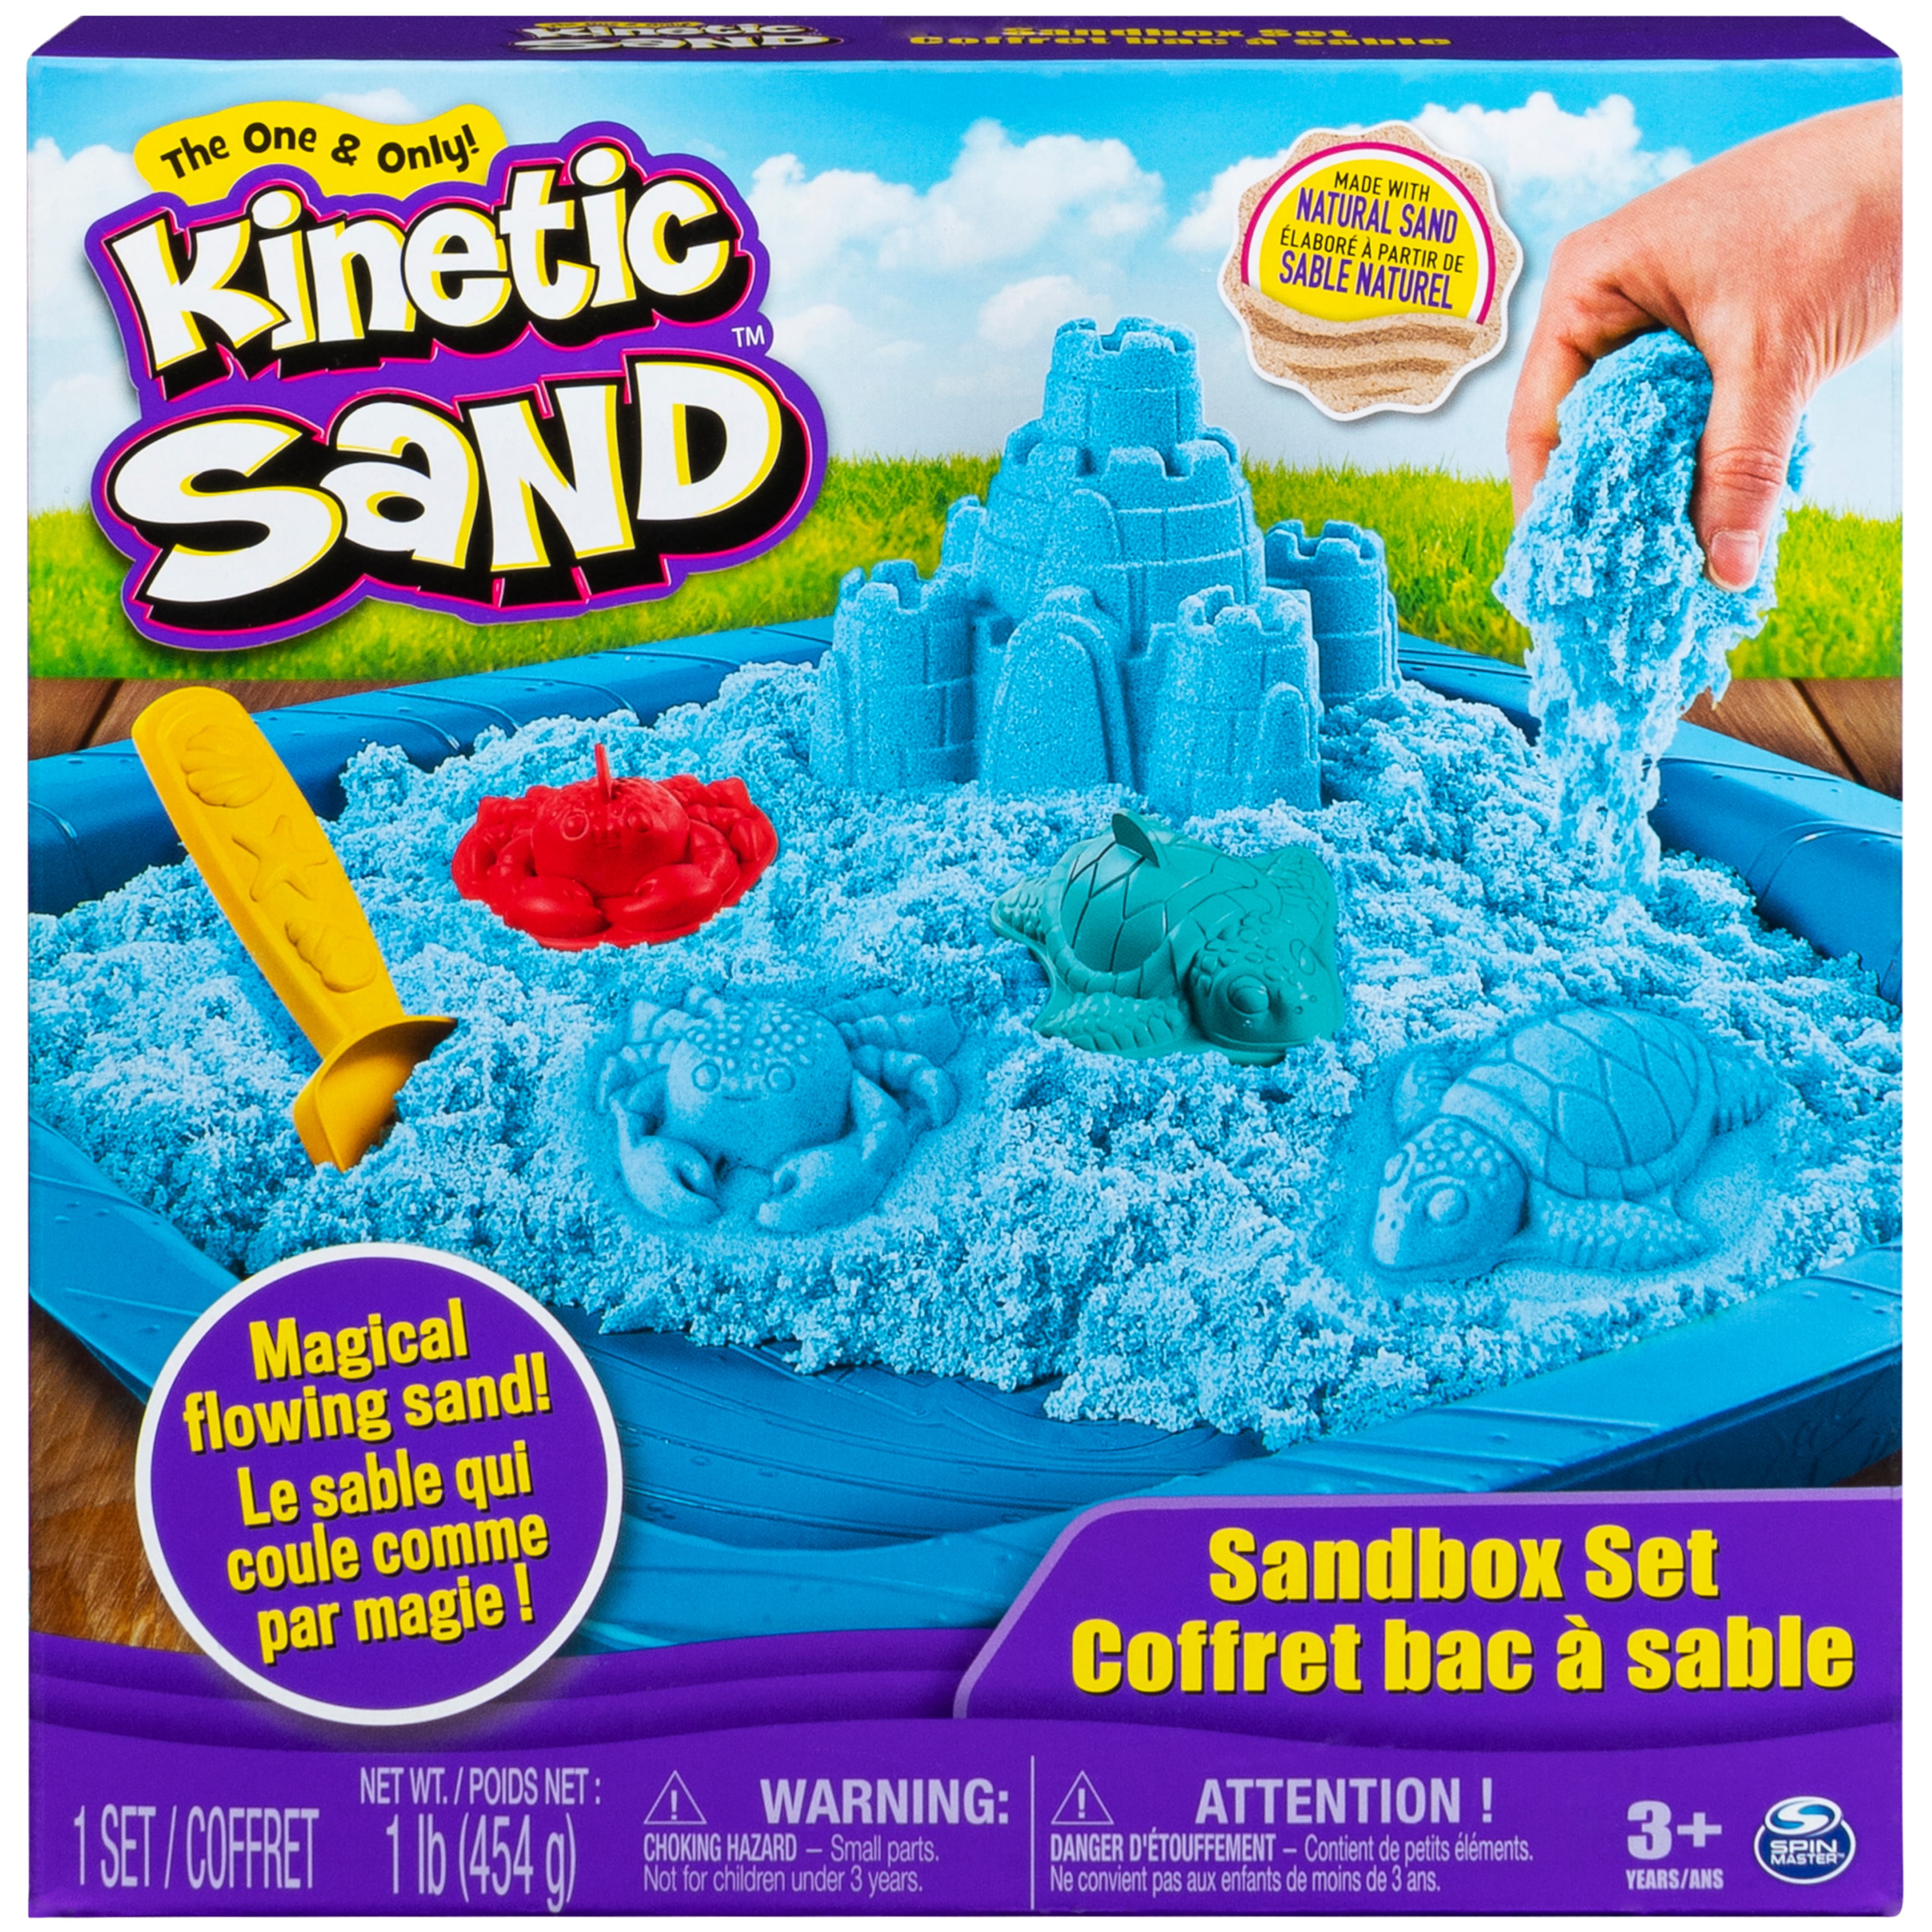 Blue Kinetic Sand The One Only Sandcastle Set 1lb Sand Molds Tools 